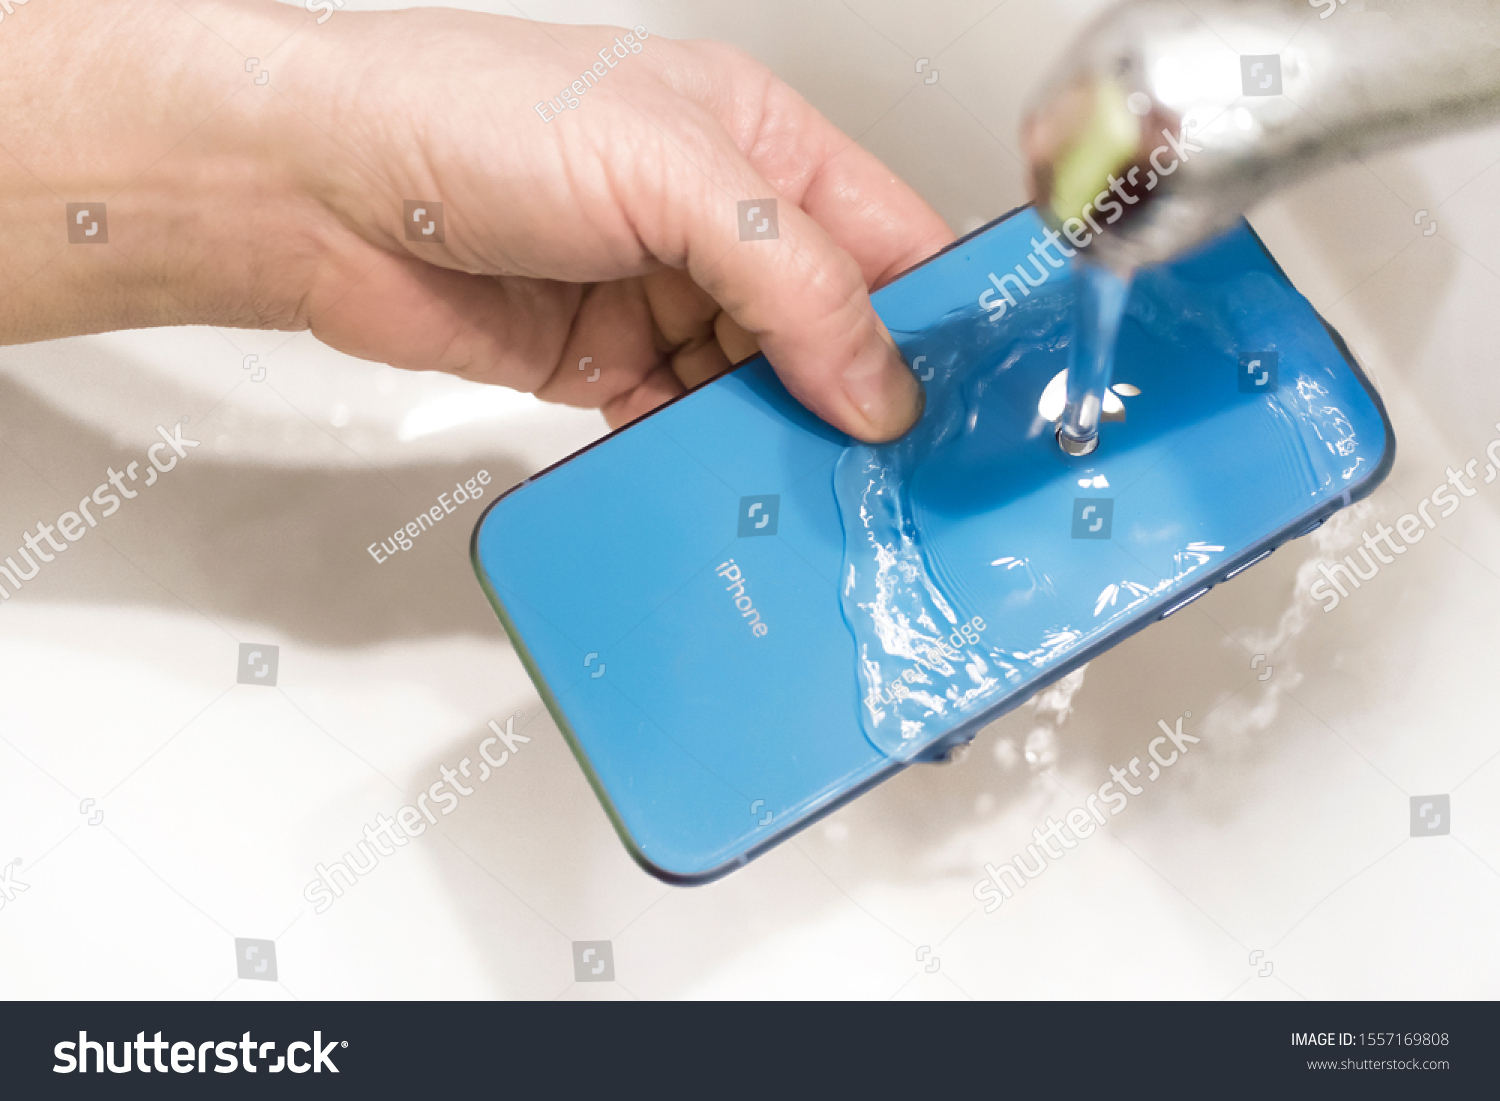 stock photo saint petersburg russia apple blue iphone xr under water water resistant technology 1557169808